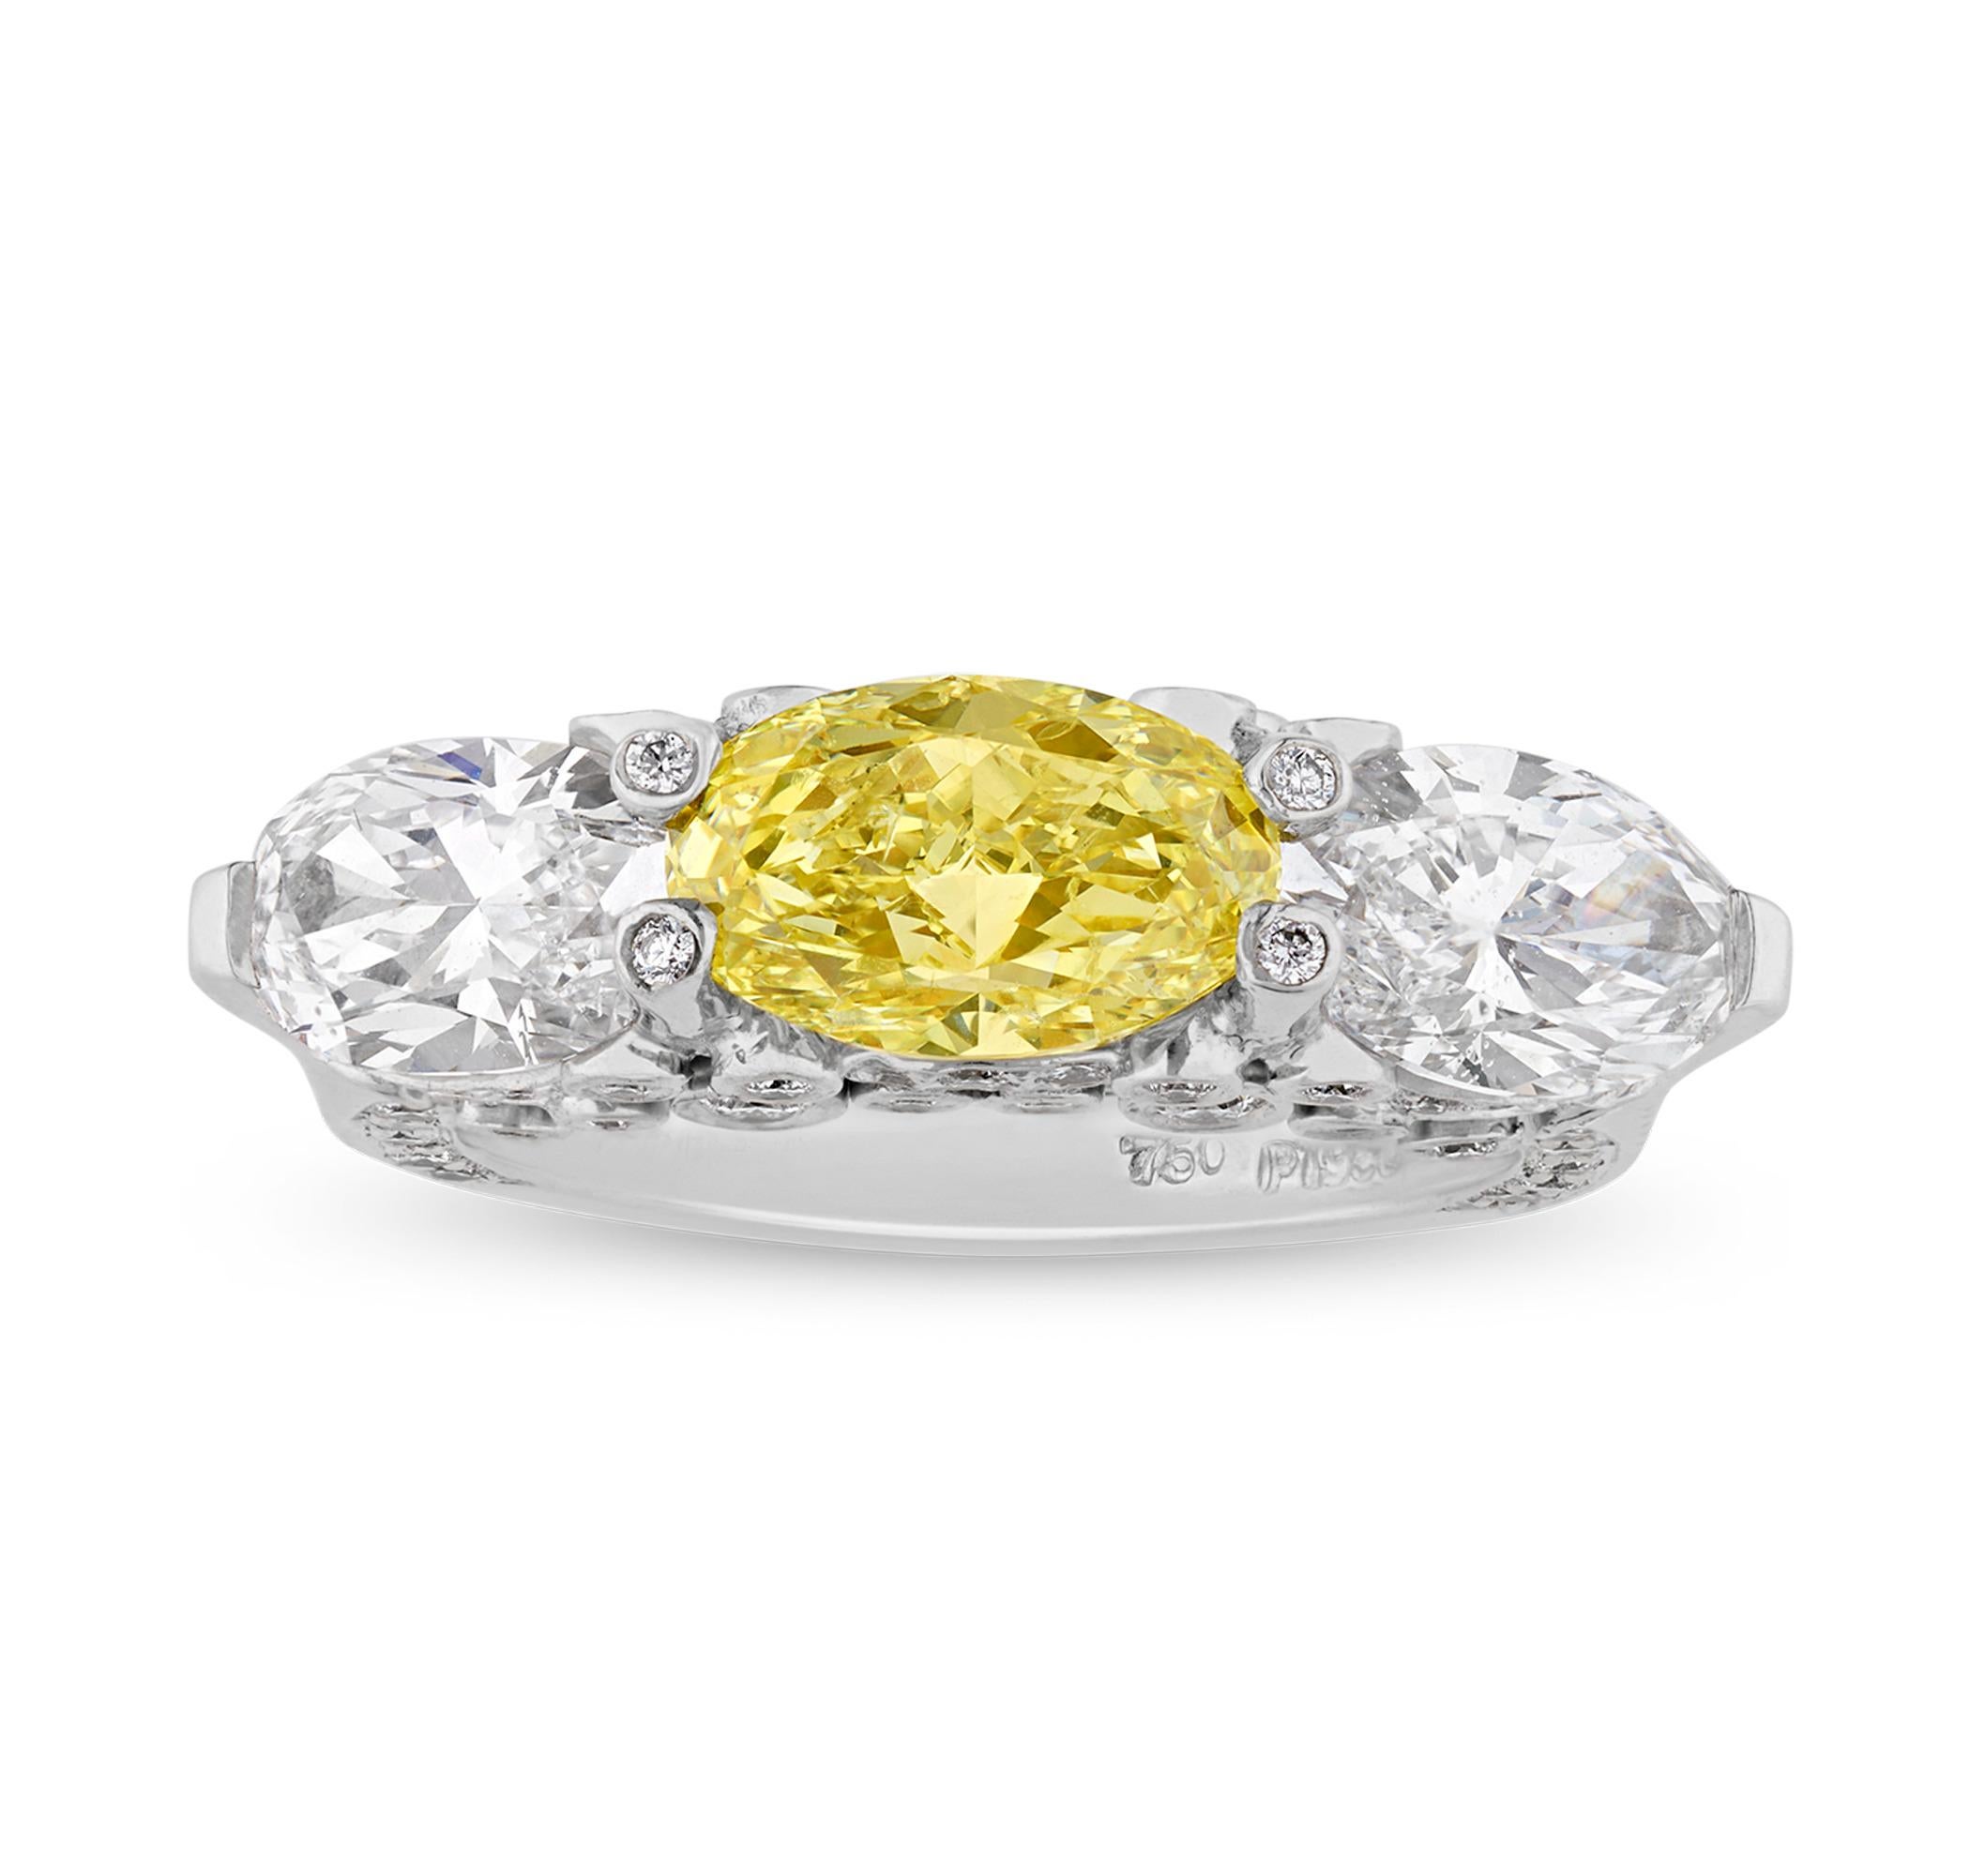 Brilliant Cut Fancy Yellow Diamond Ring, 1.81 Carats For Sale